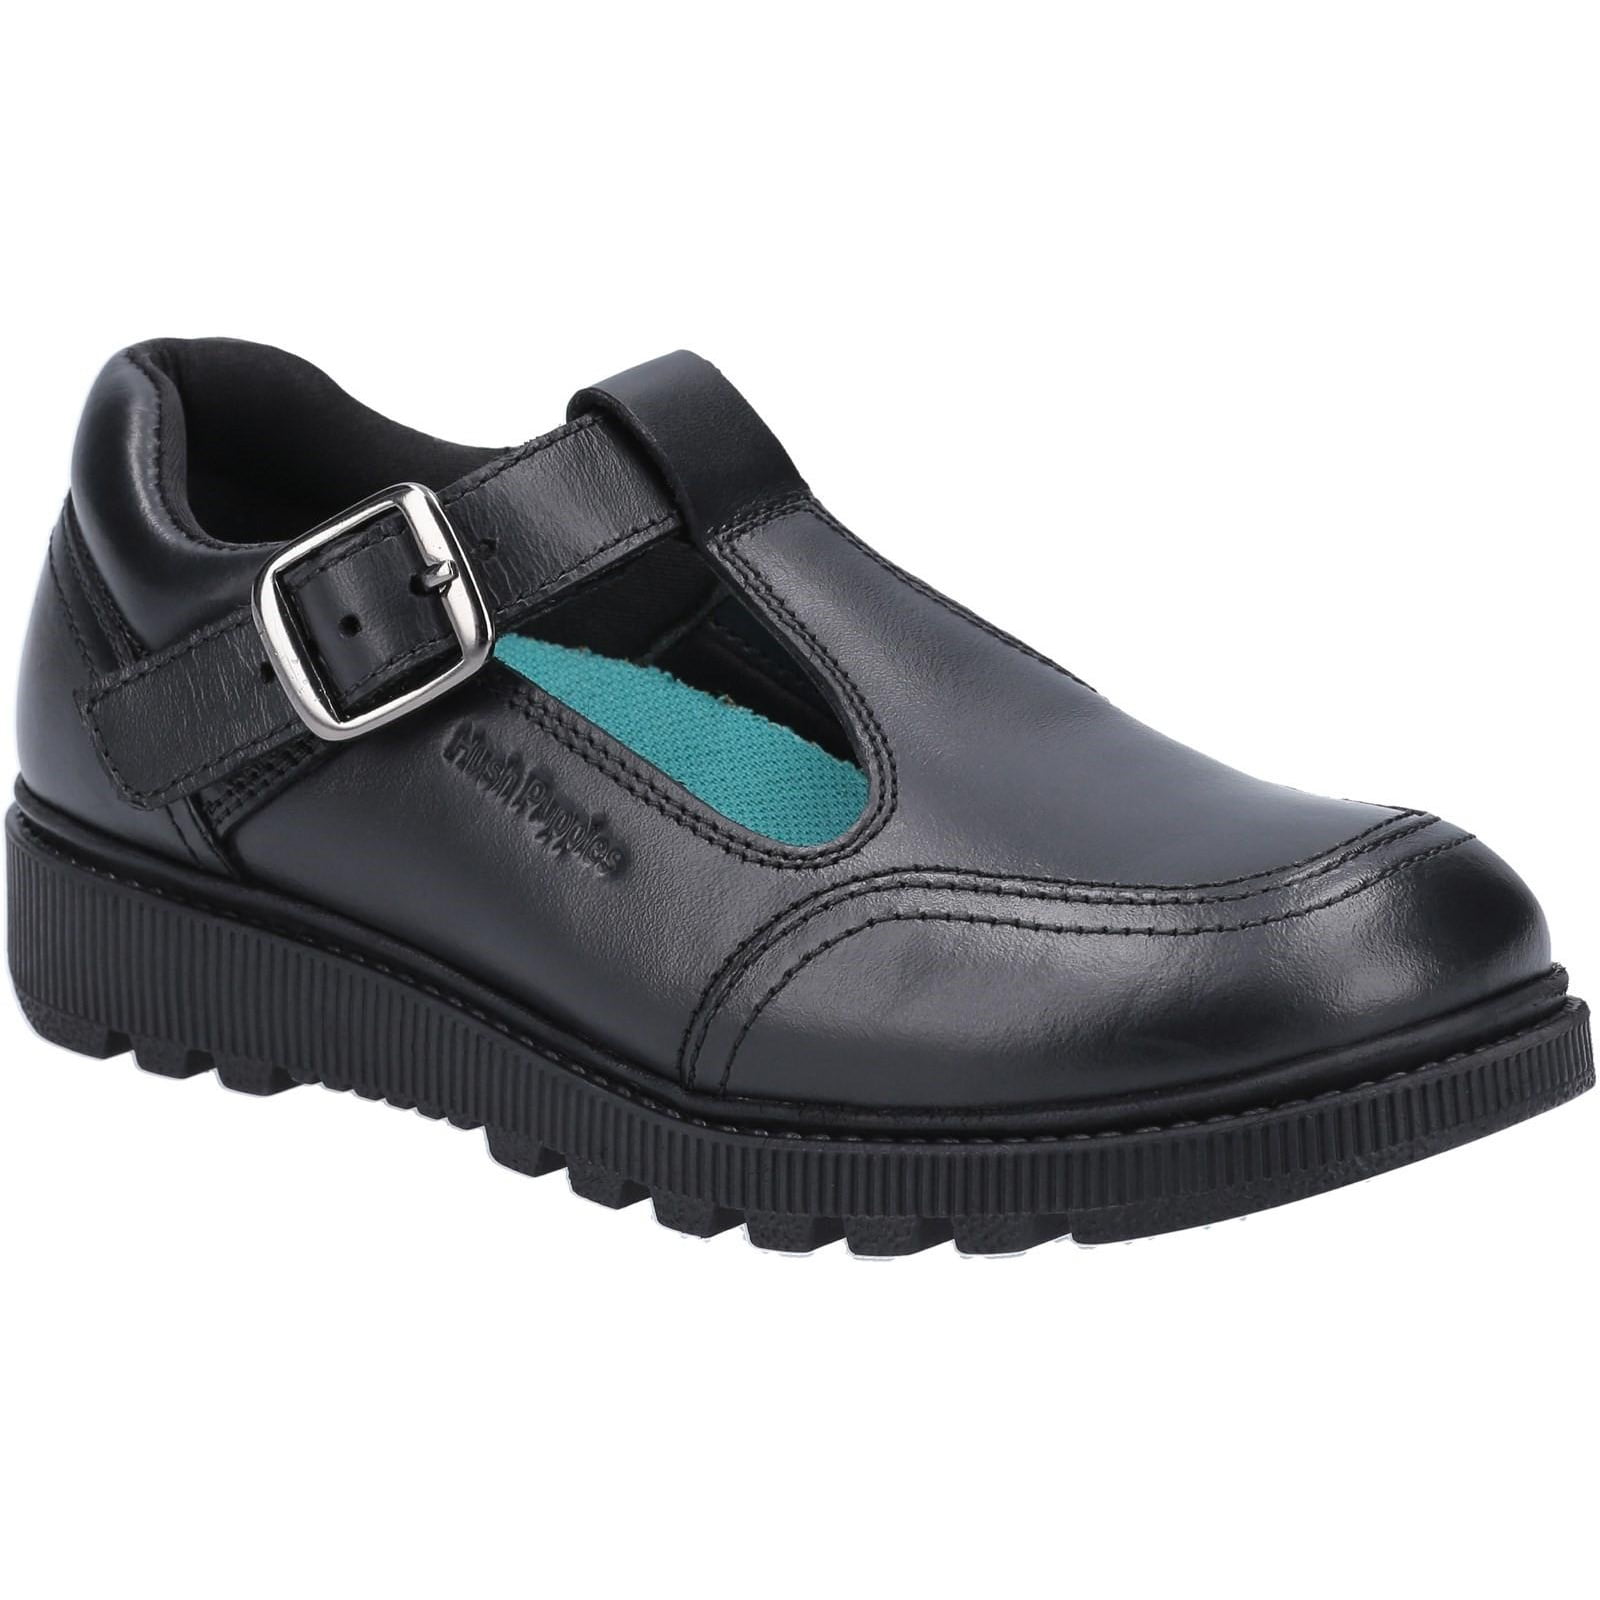 Hush Puppies Girls Leather School Shoes -